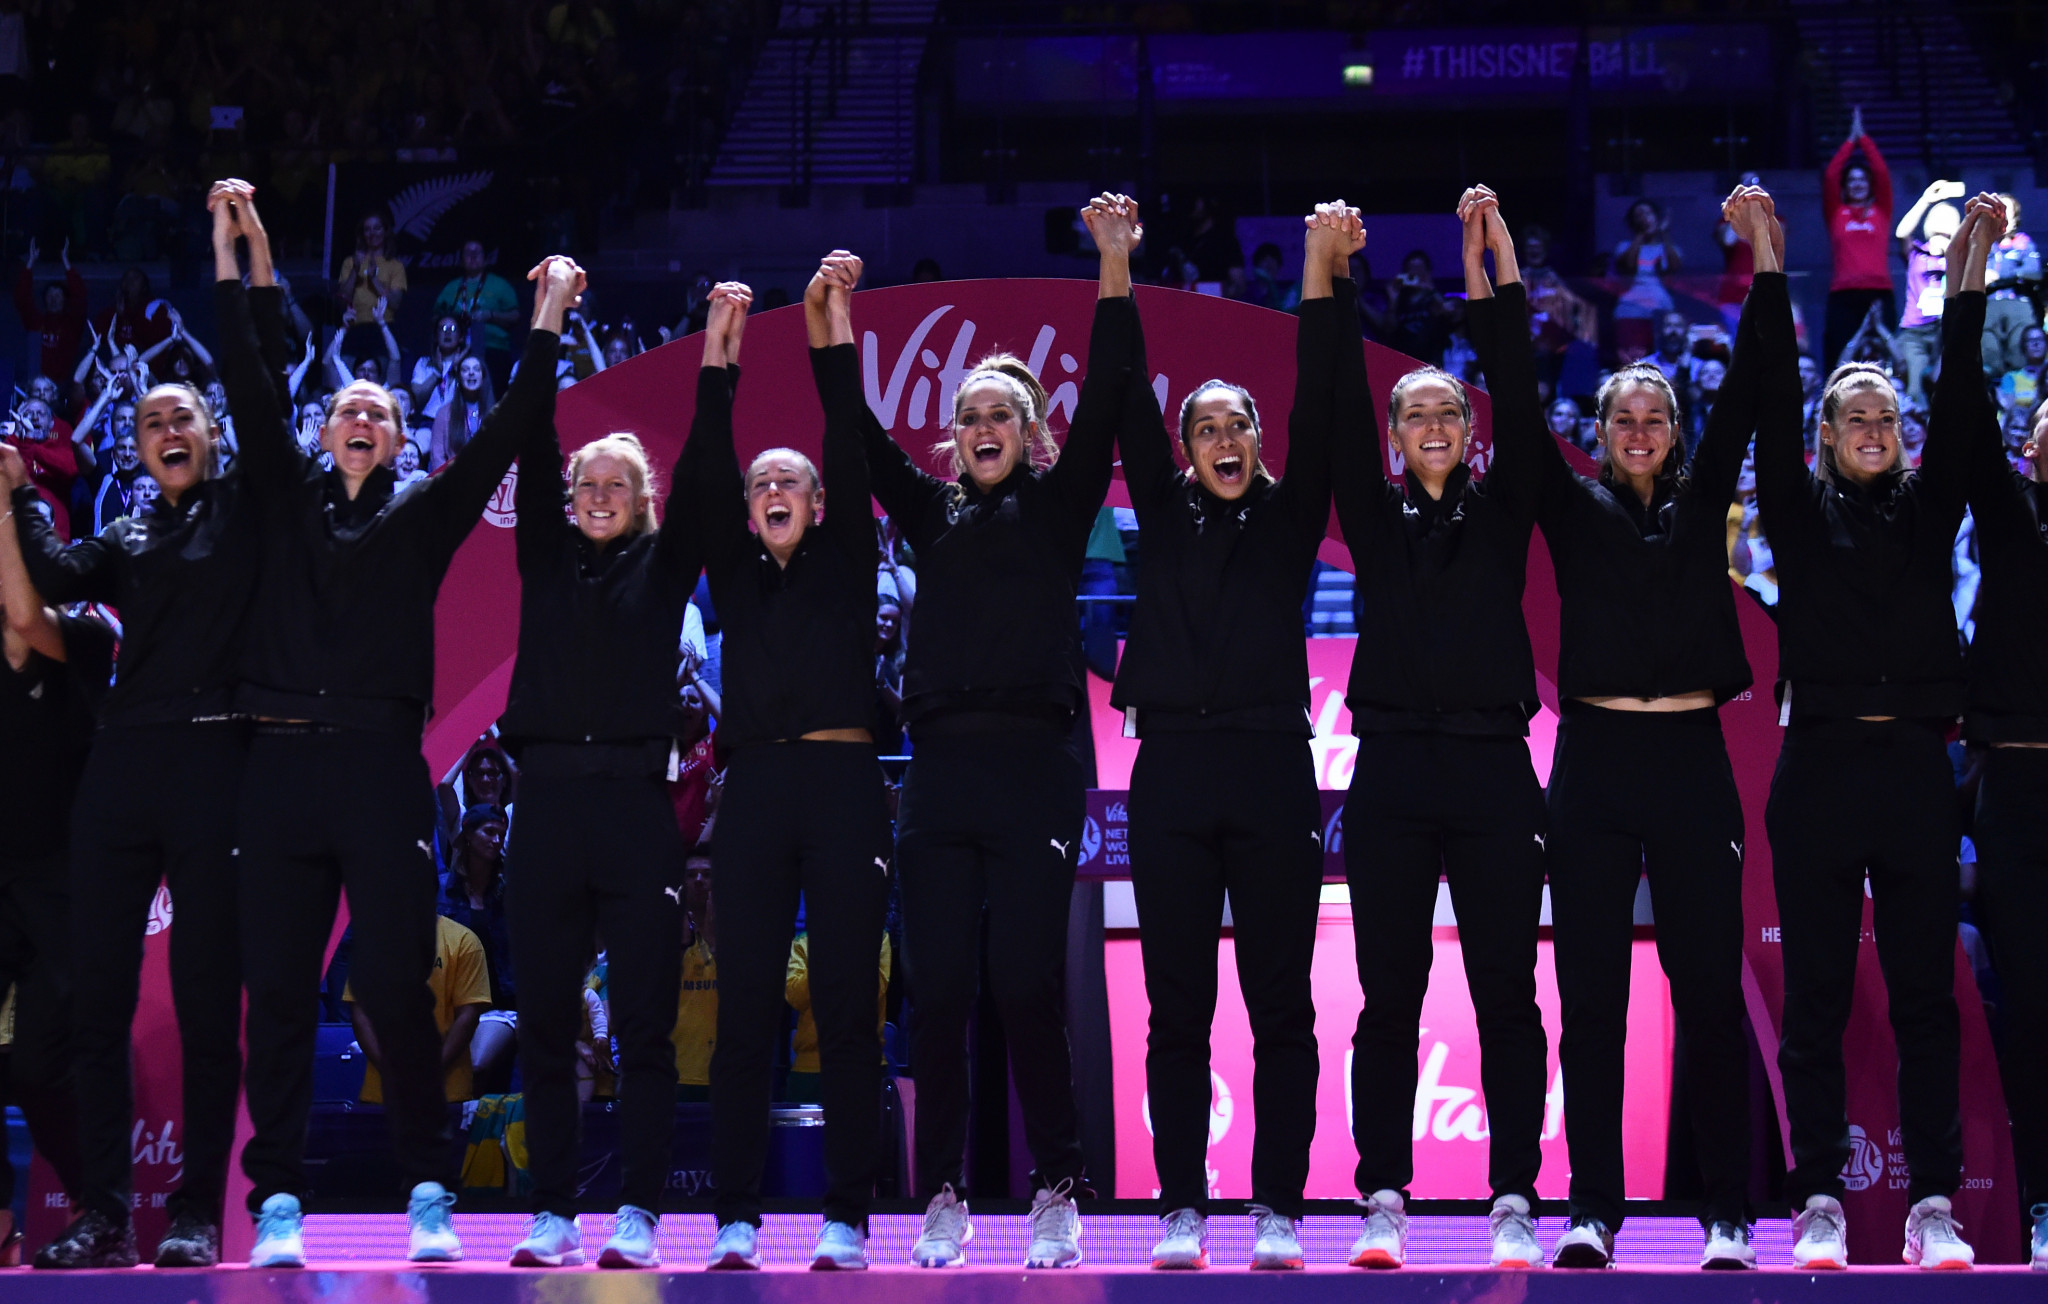 New Zealand triumphed at this year's Netball World Cup ©Getty Images